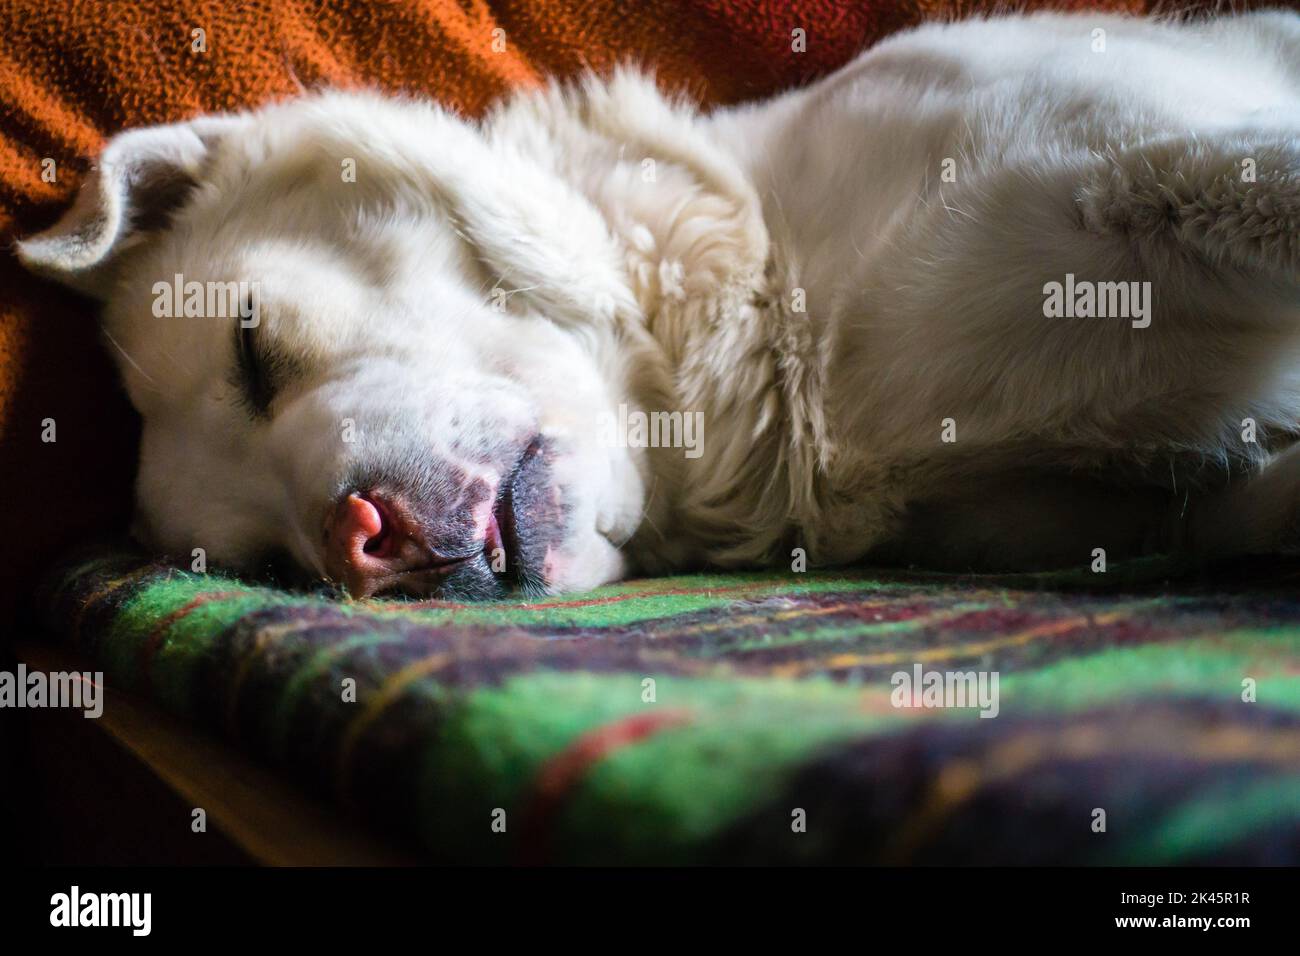 A close up shot of white himalayan shepherd dog sleeping on a bed in an Indian house hold. Stock Photo